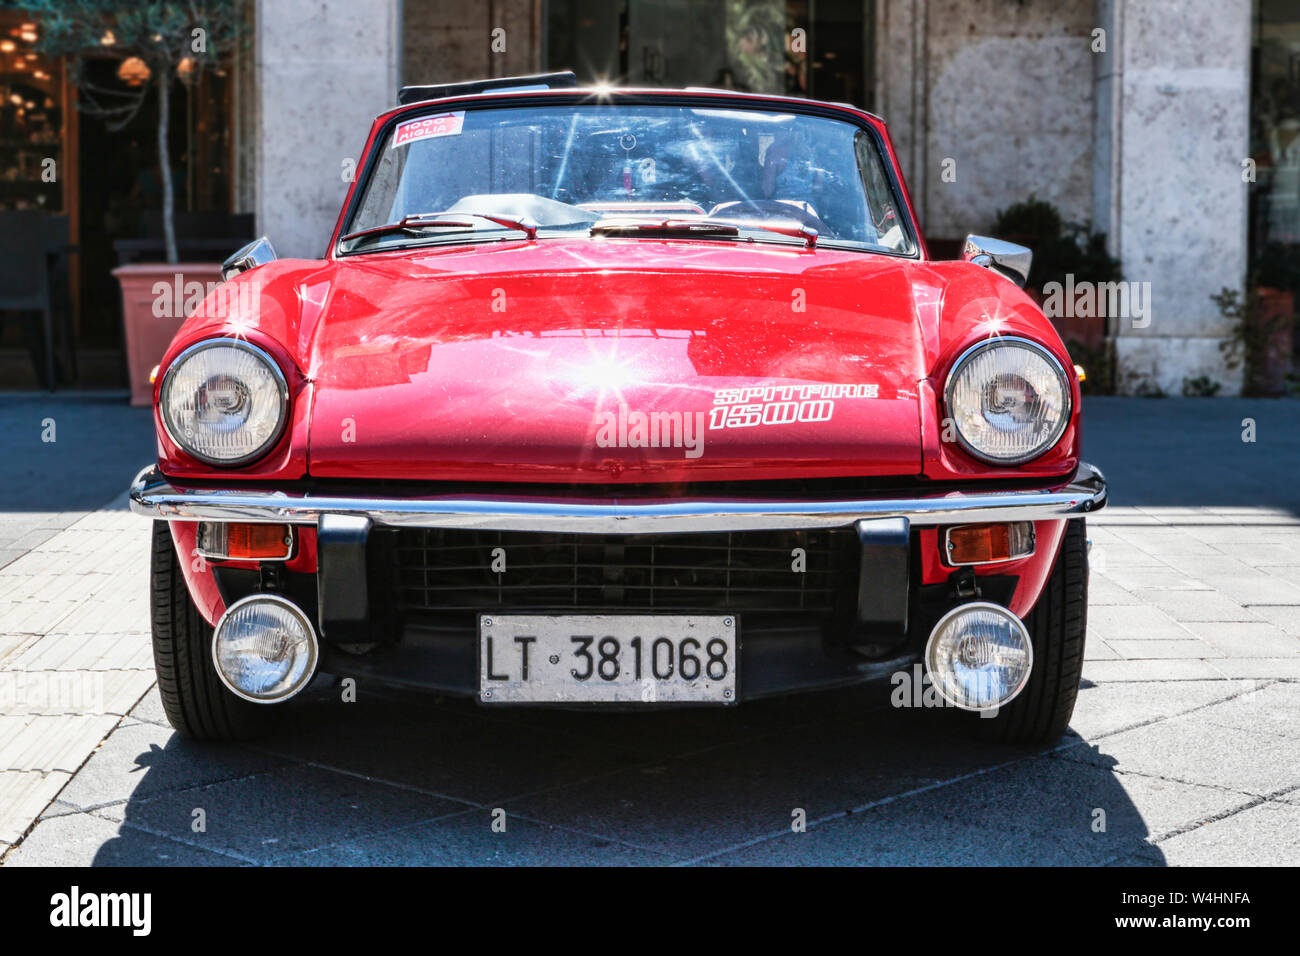 Rome,Italy - July 20, 2019:Rome capital city Rally event, an exhibition of vintage cars with the beutiful red car model Spitfire 1500 Stock Photo